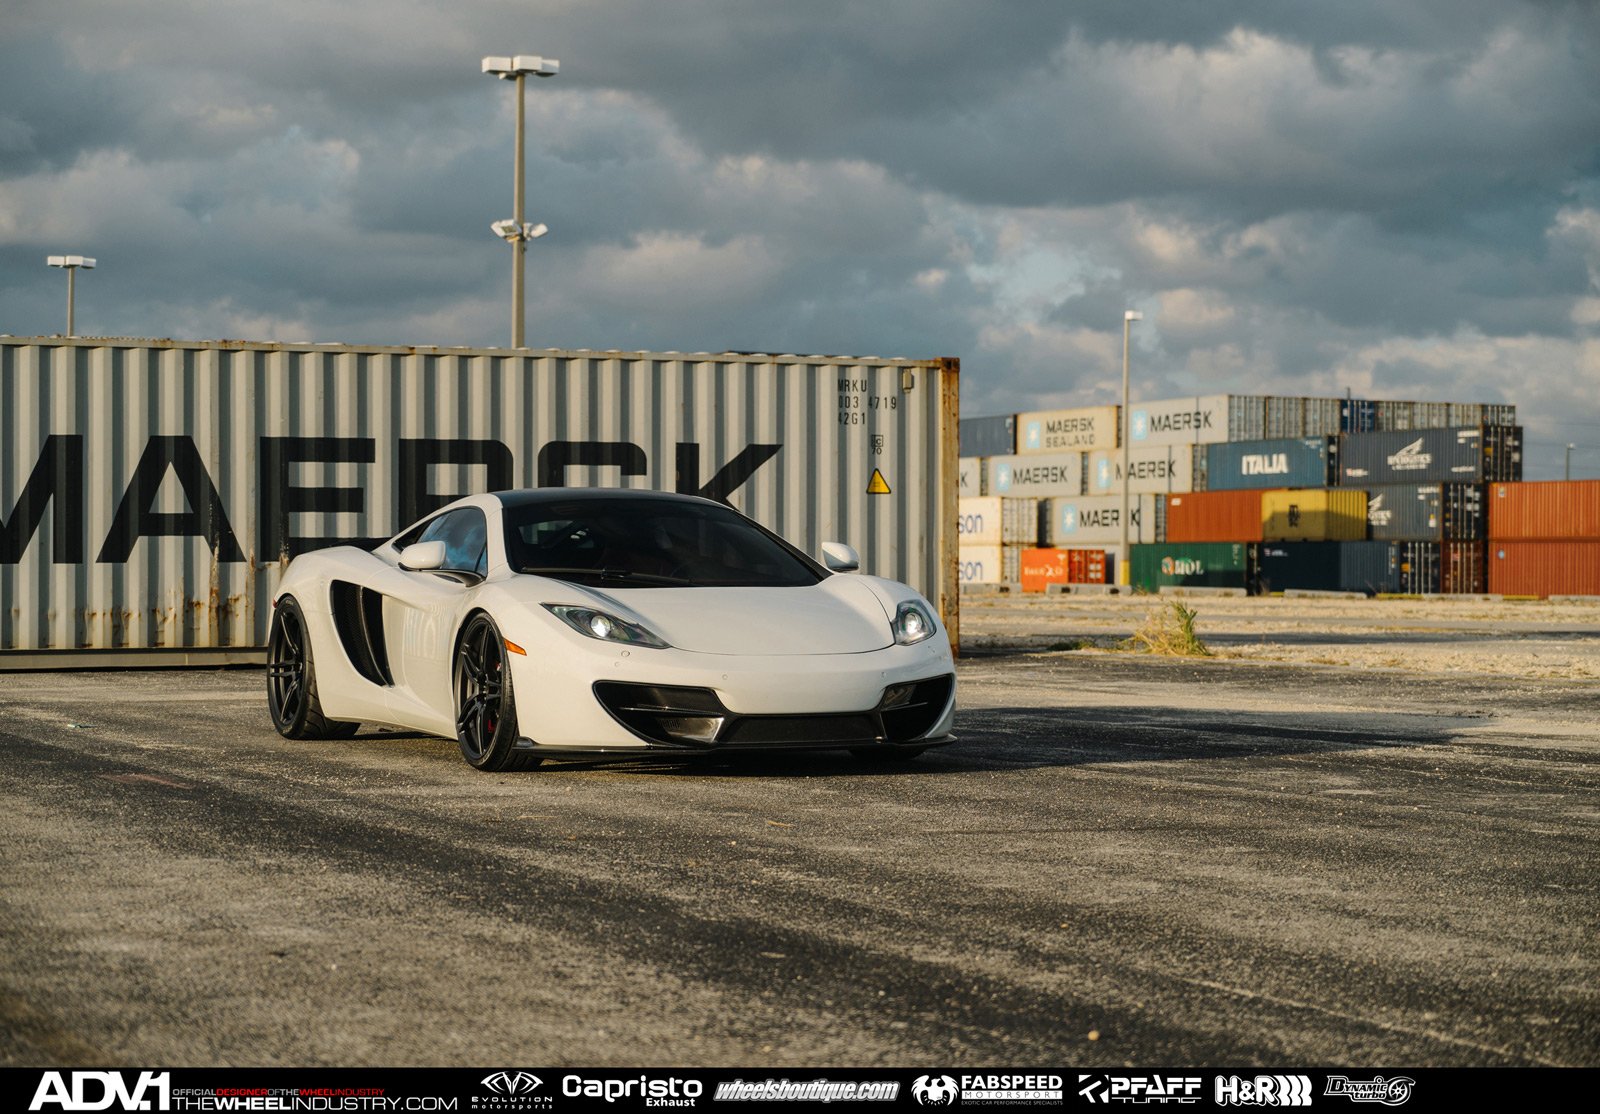 2015, Adv1, Cars, Supercars, Coupe, Wheels, Tuning, Mclaren, Mp4, 12c Wallpaper